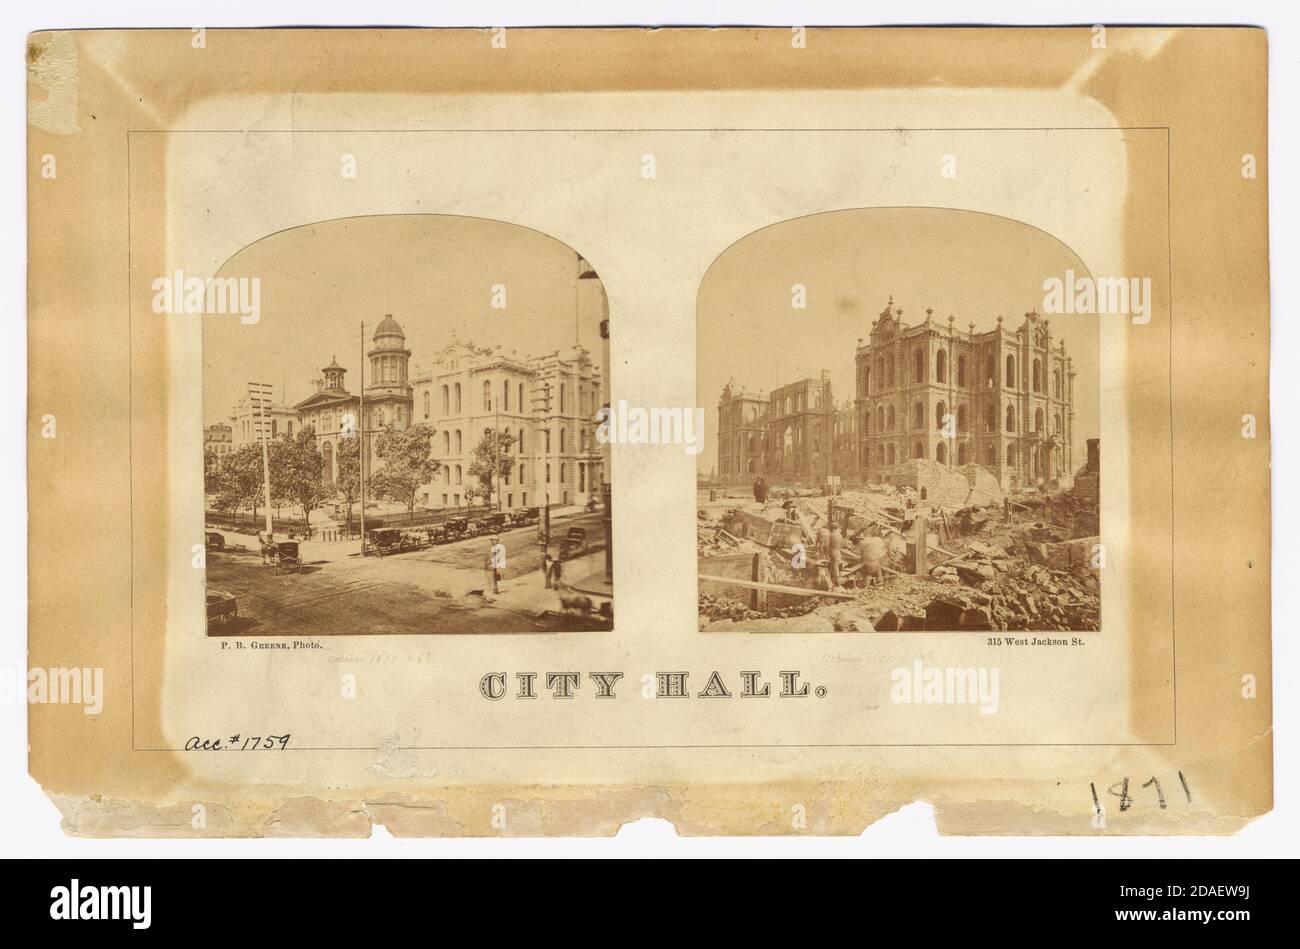 City Hall and Courthouse on October 8 and October 13, 1871, before and after the Chicago Fire of 1871, Chicago, Illinois. Stock Photo